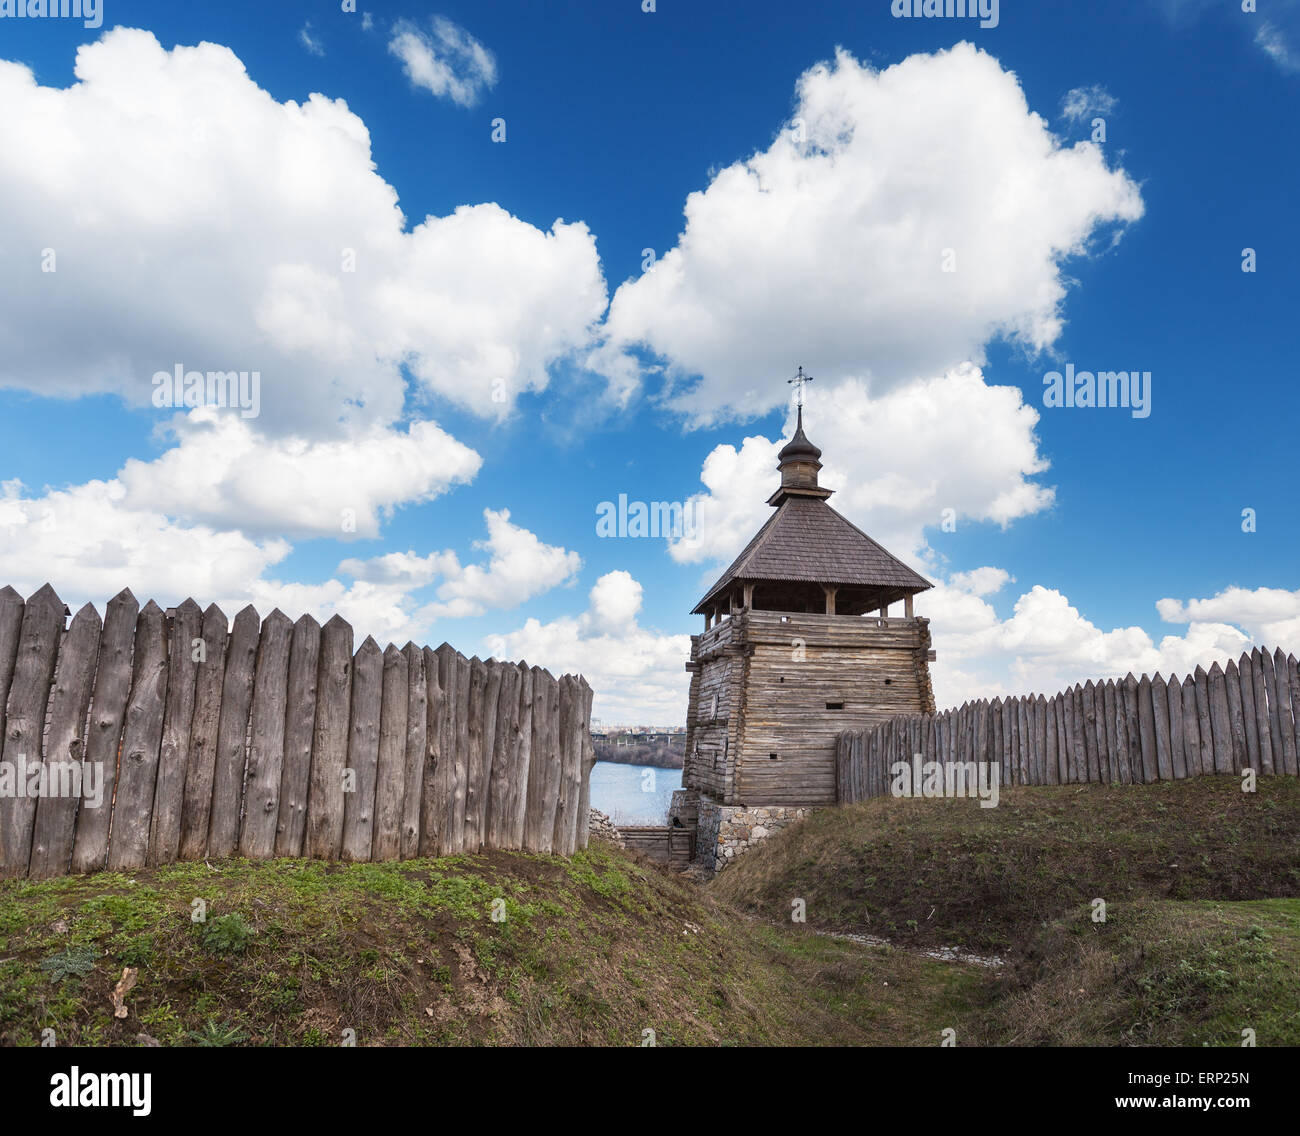 Old wood rustic church building and wooden fence against blue sky at sunset Stock Photo